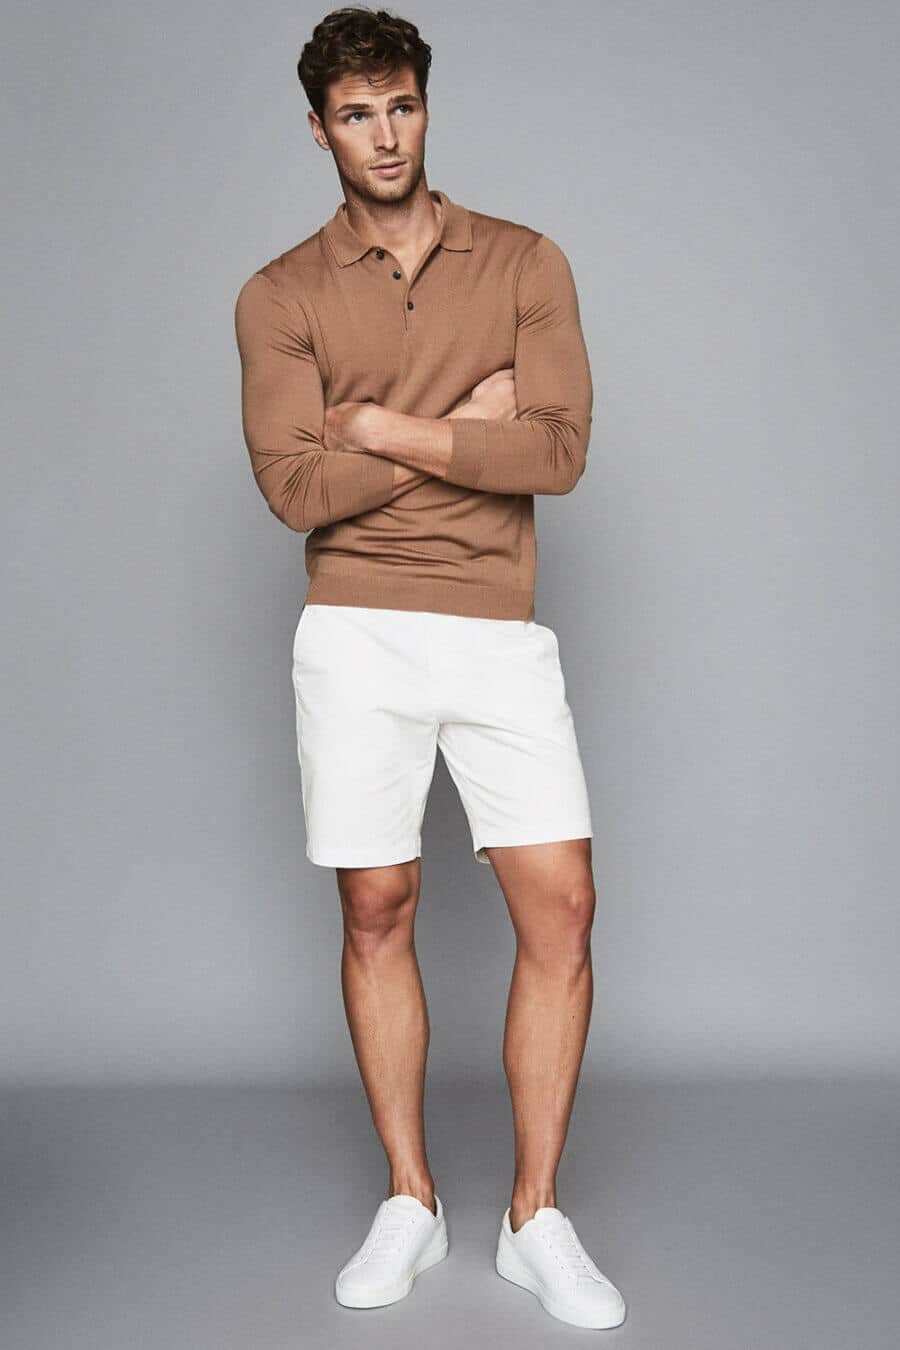 Men's white shorts, knitted polo shirt and sneakers summer outfit